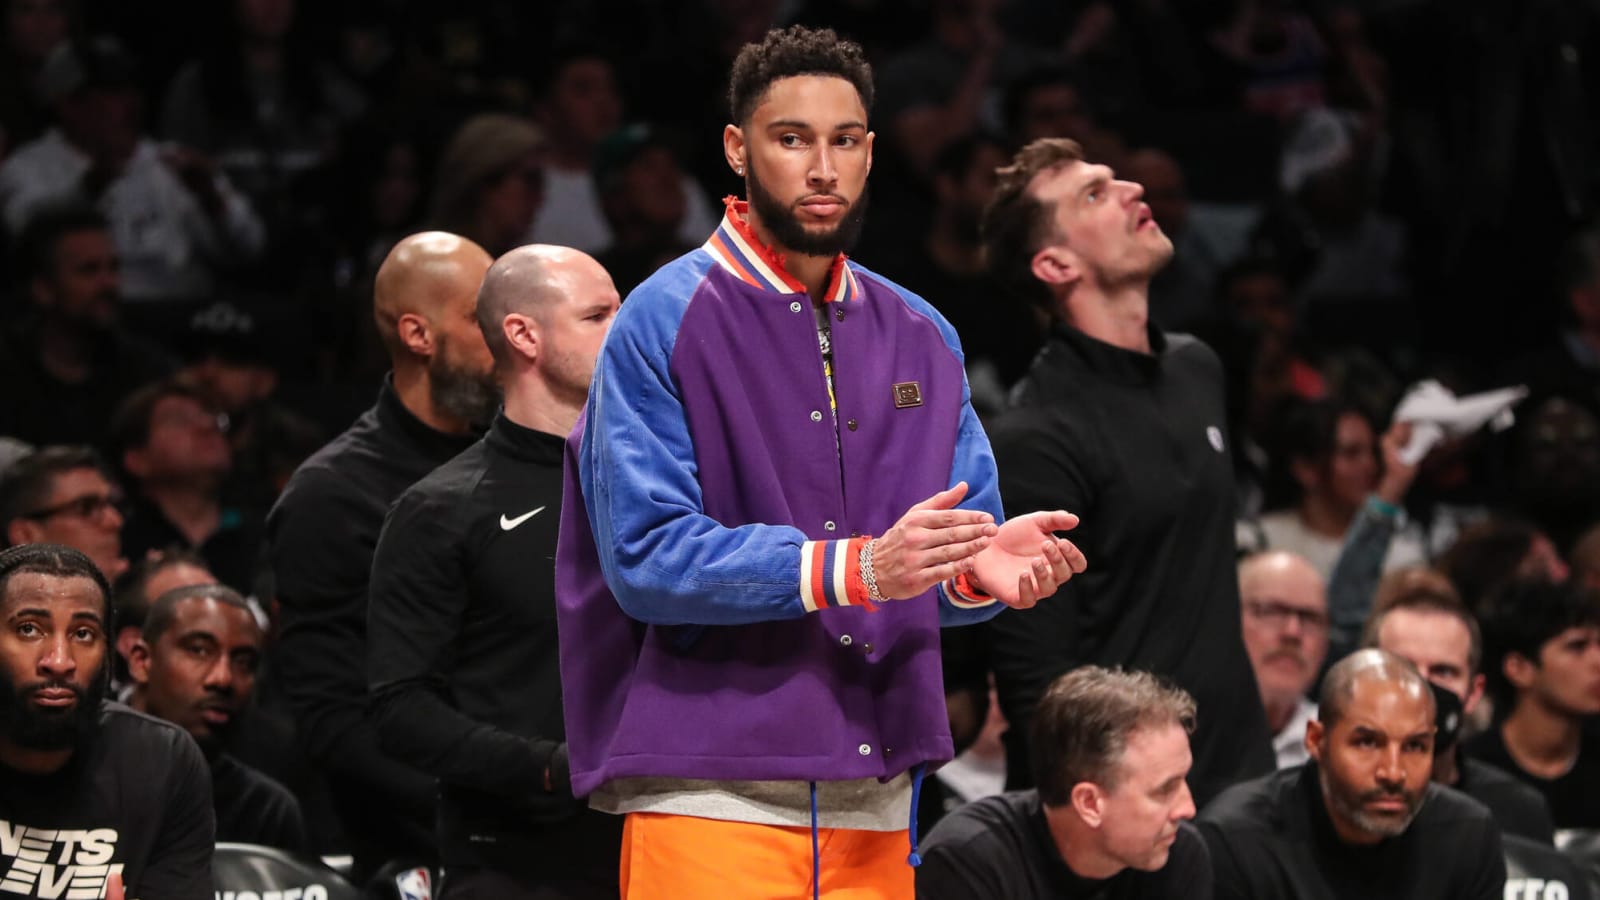 Ben Simmons on last season drama: 'All I wanted was help'